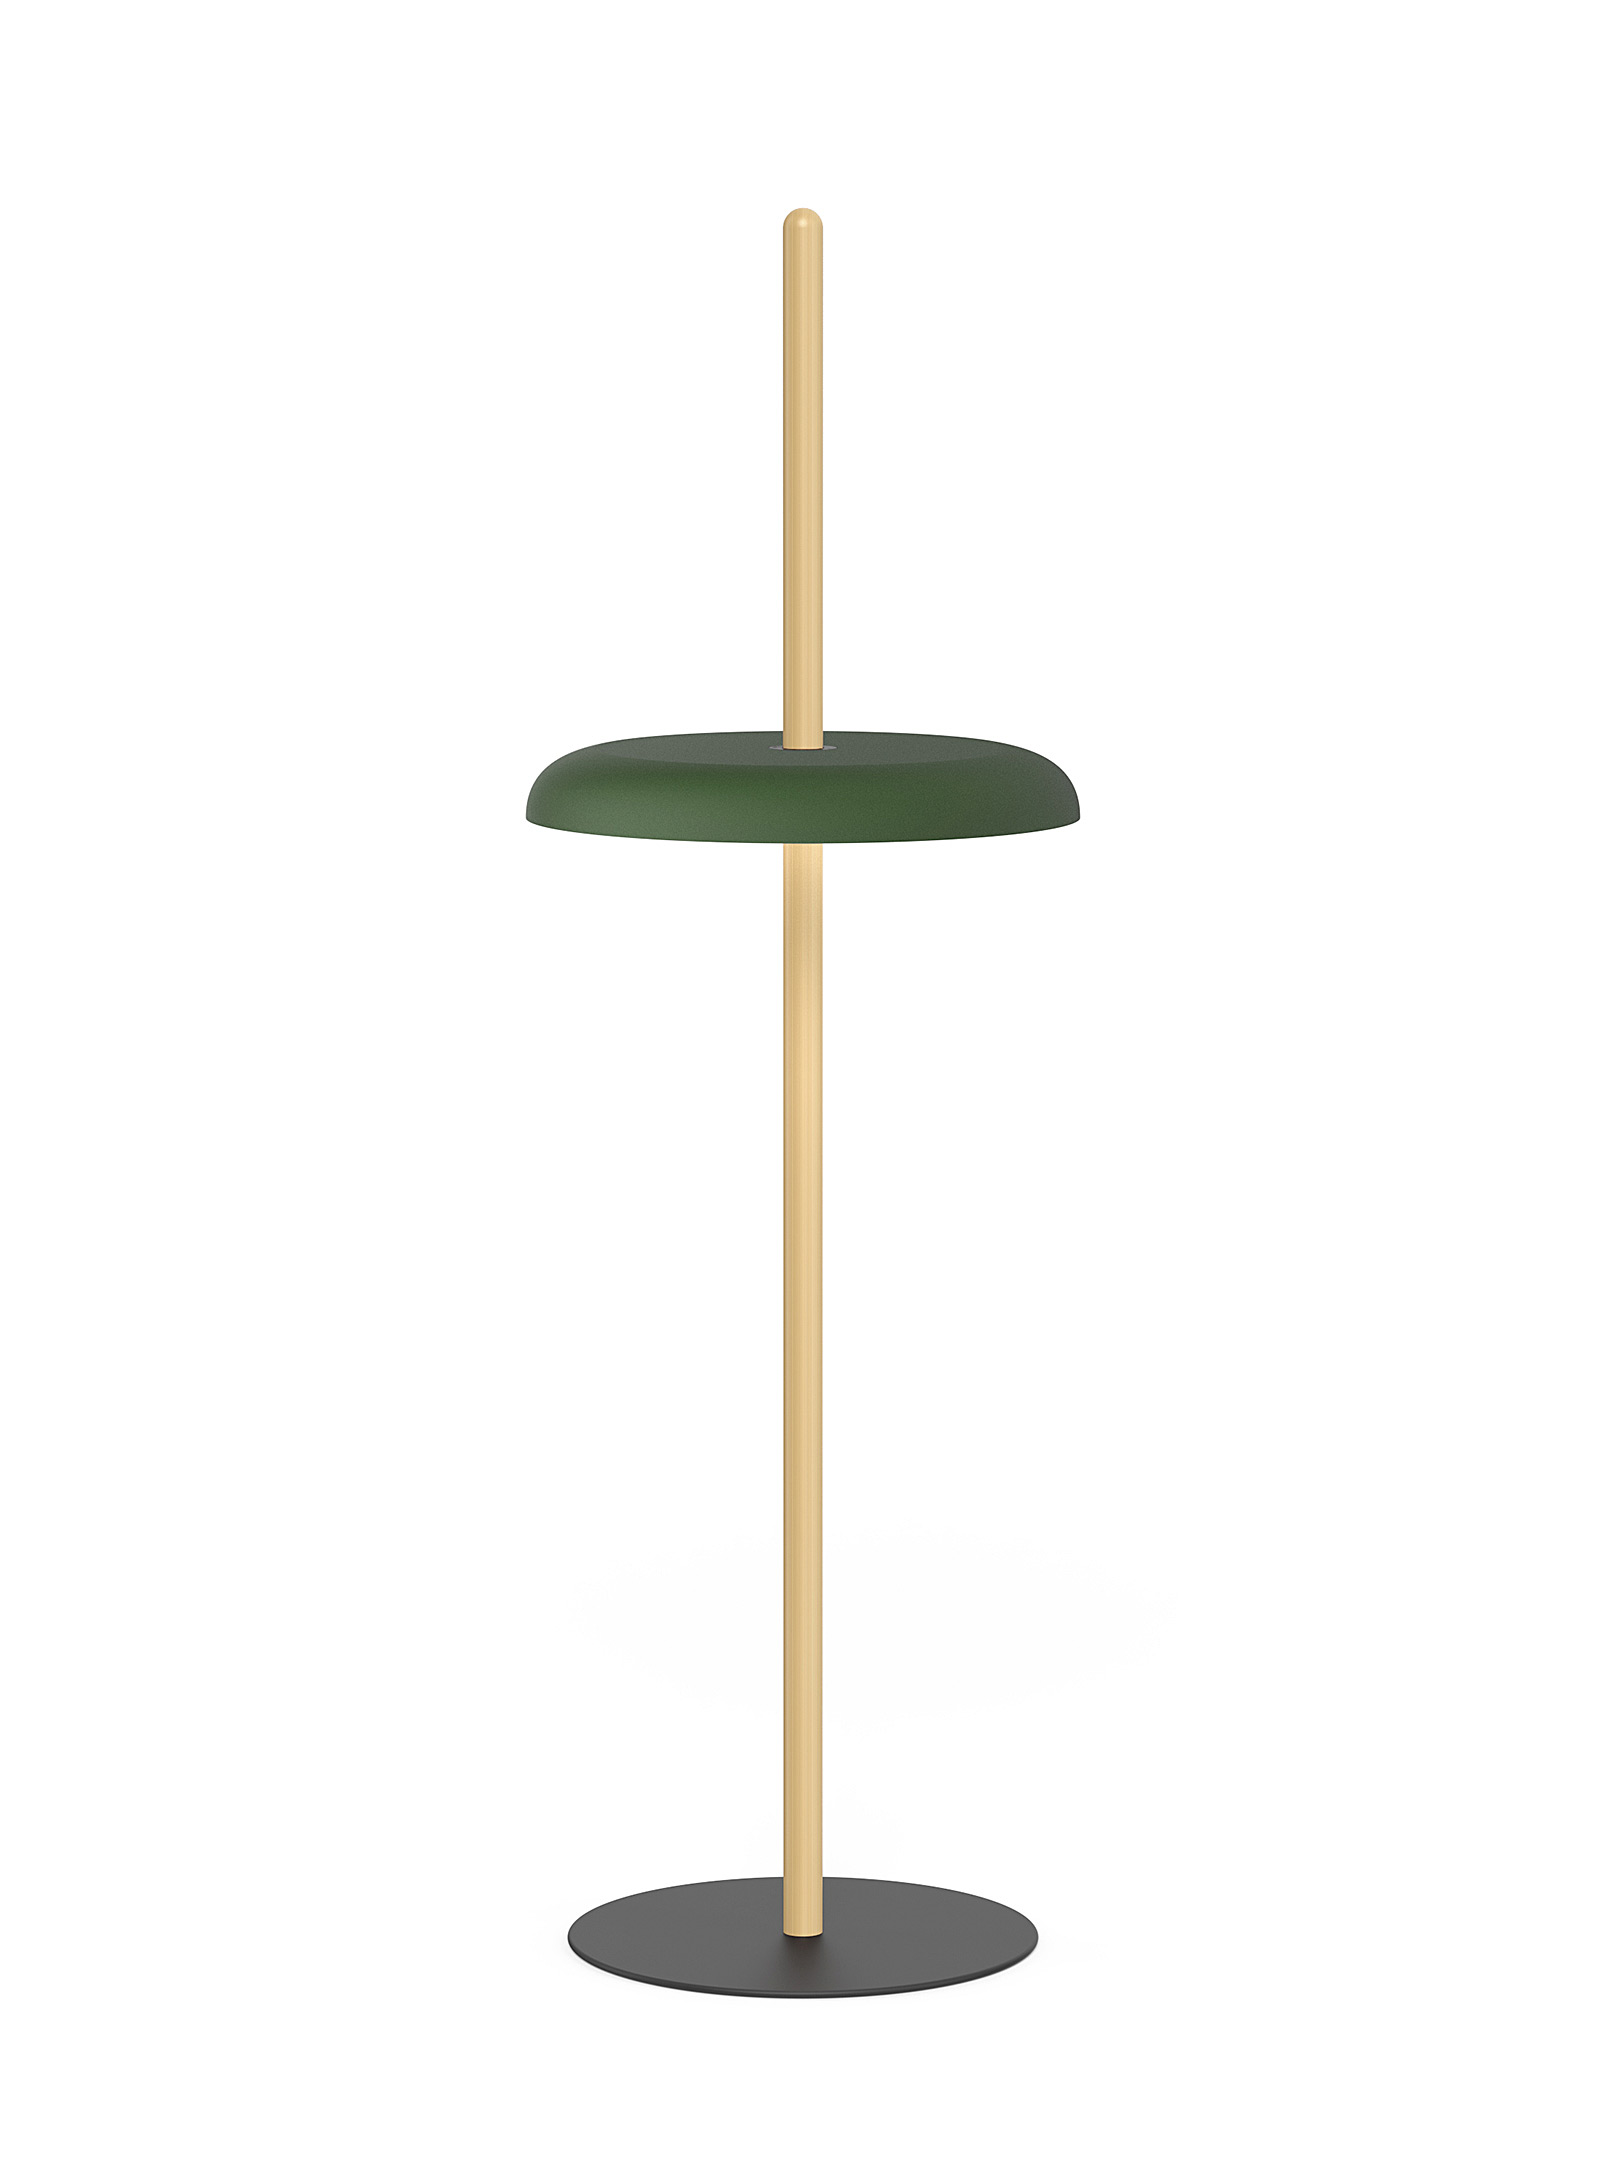 Pablo Designs Nivél Floor Lamp With Solid Oak Pole In Green